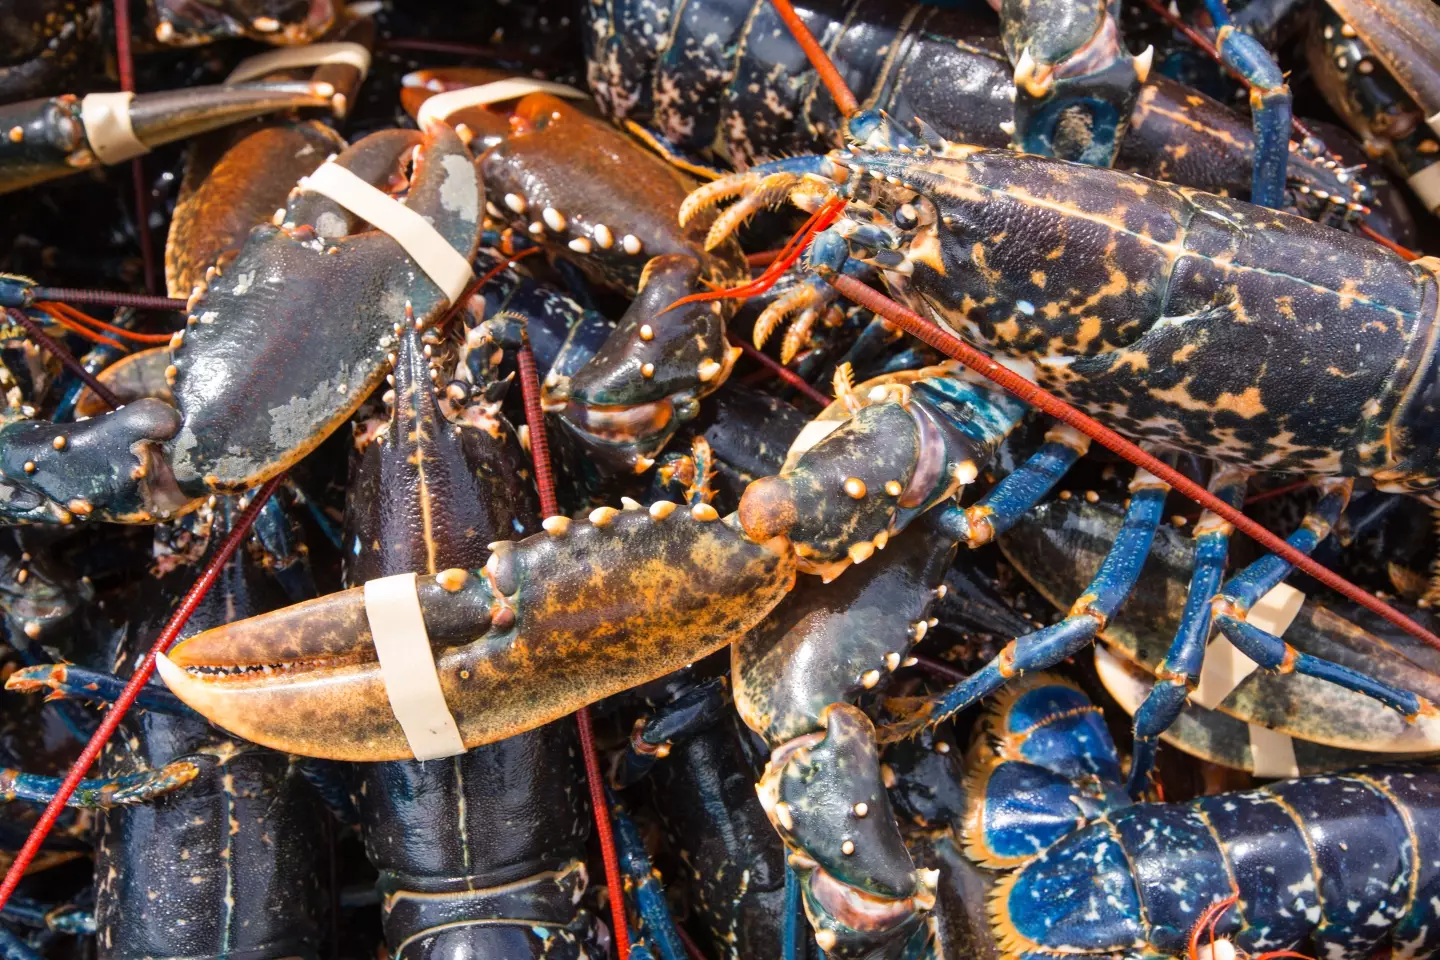 Even stunning the lobsters before boiling may not ensure an entirely painless death (